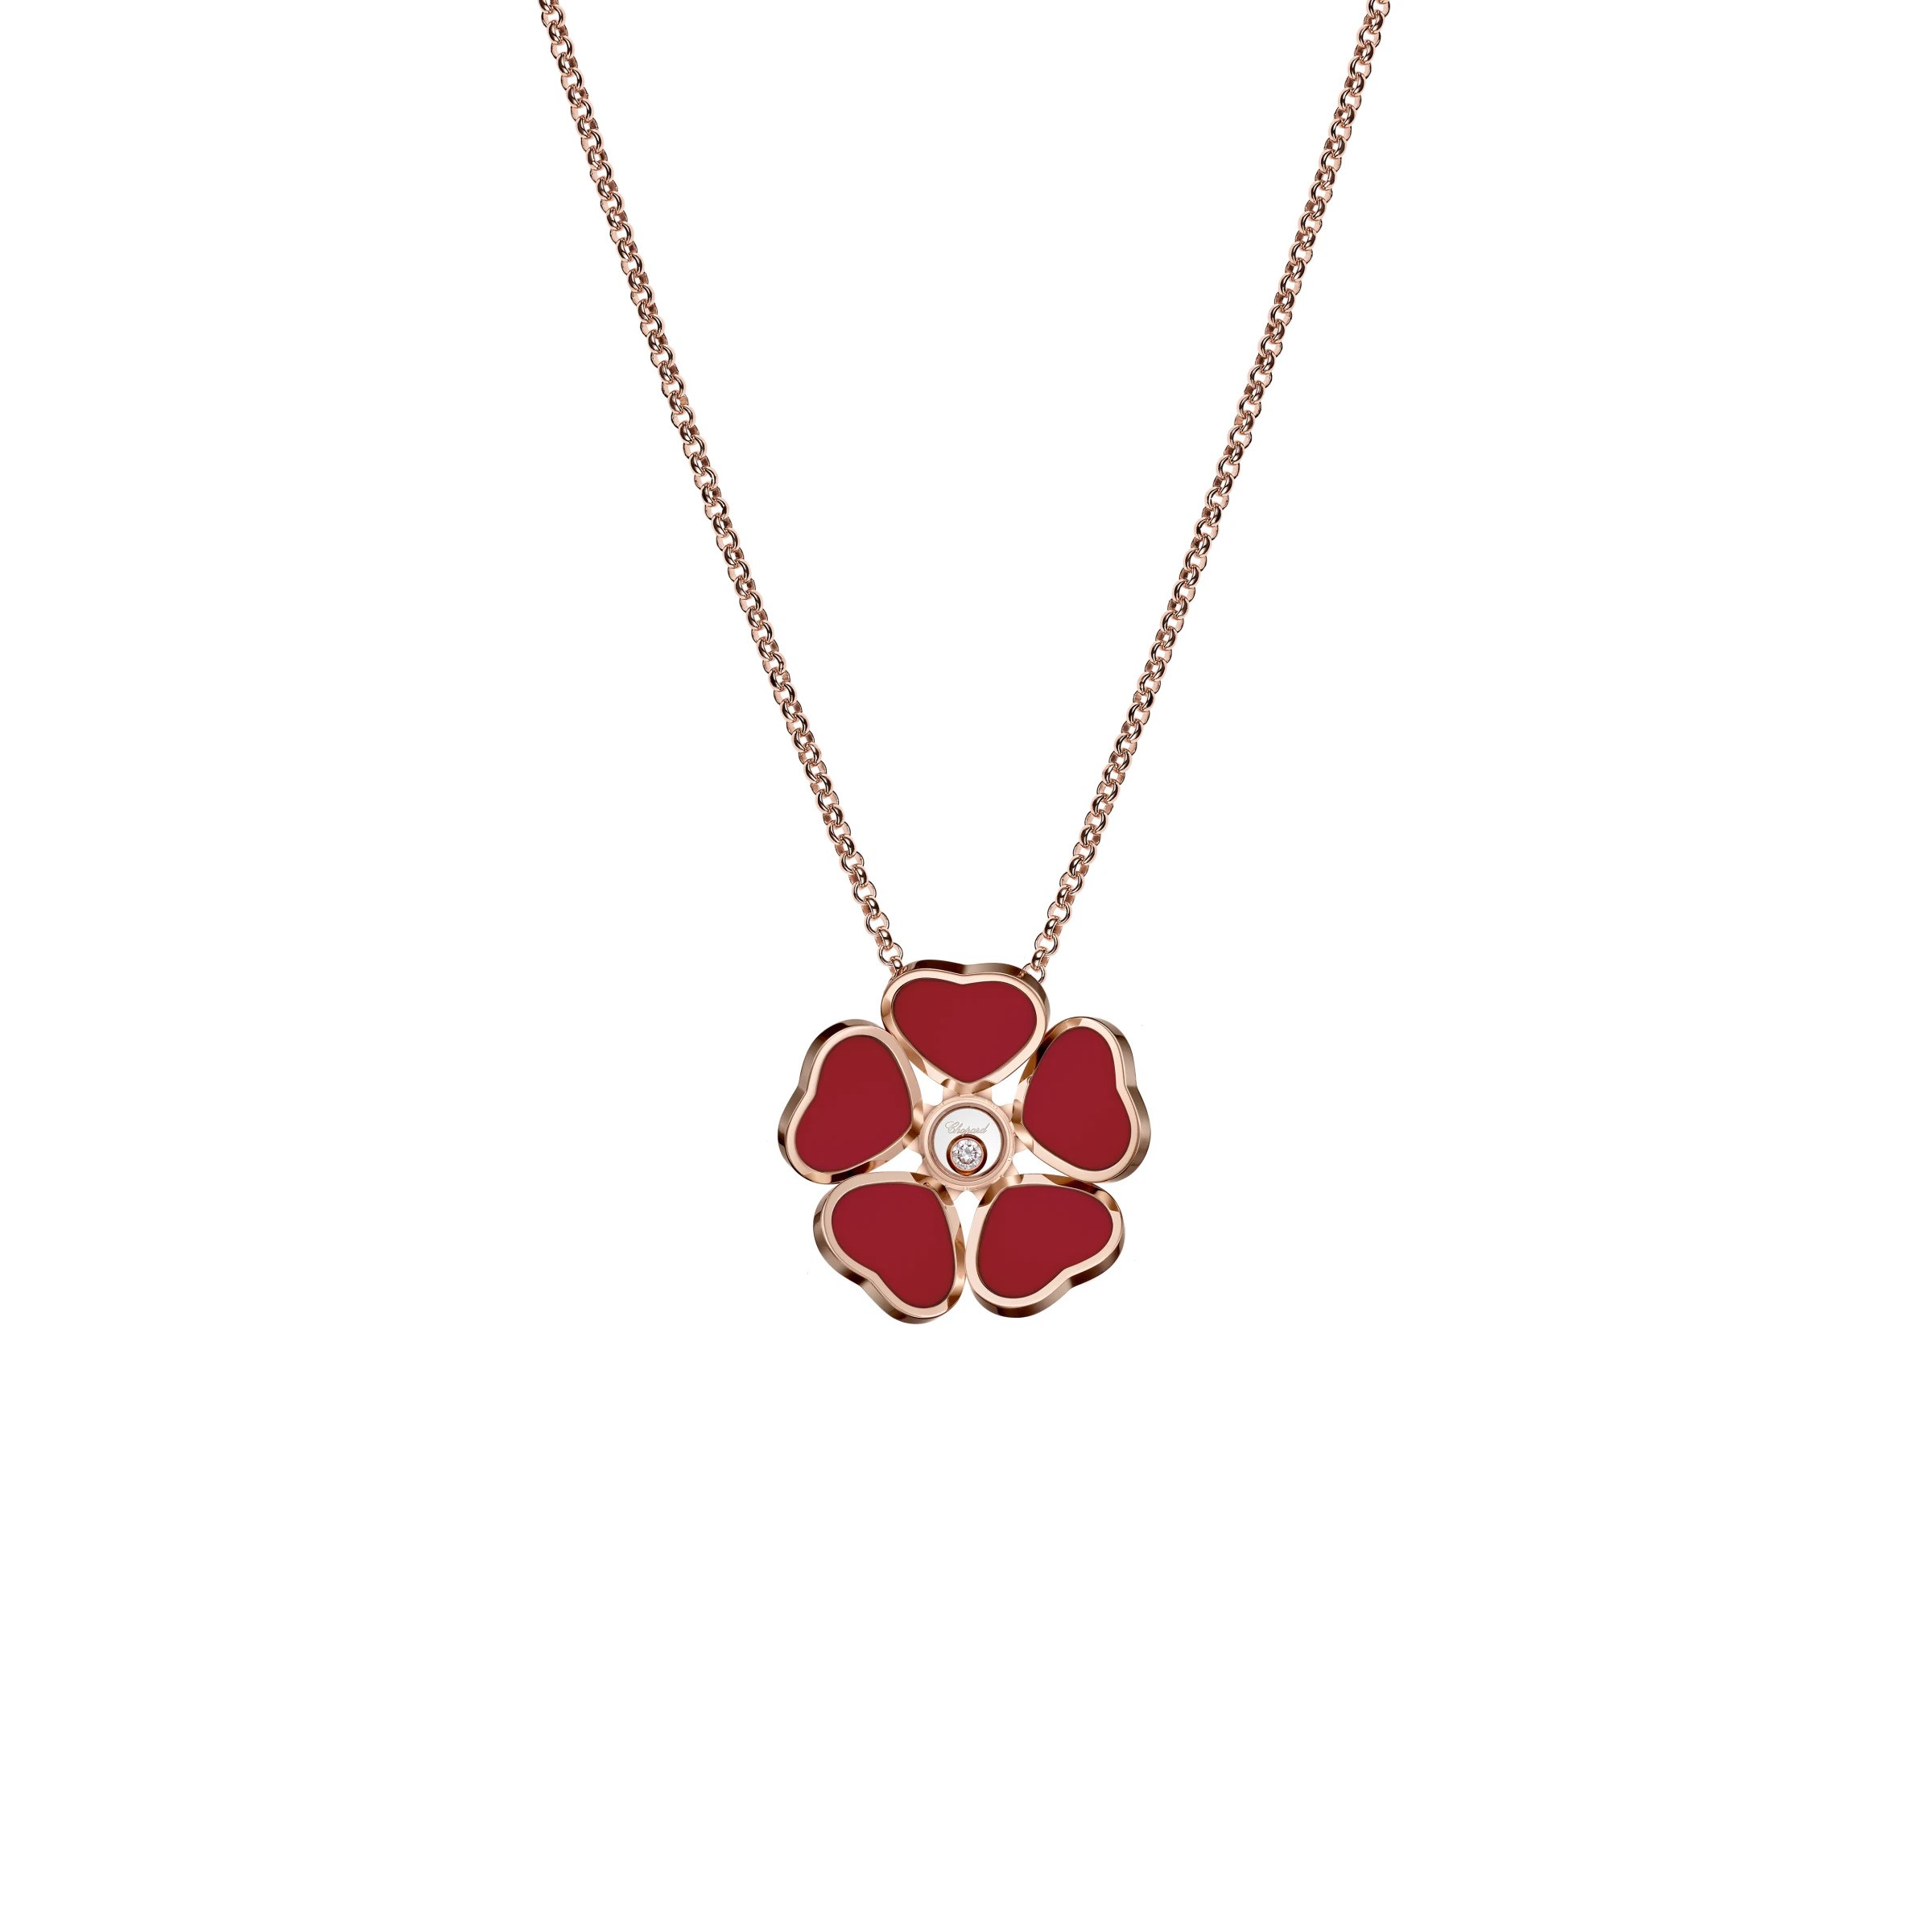 The Best Blooming Floral Necklaces for Spring